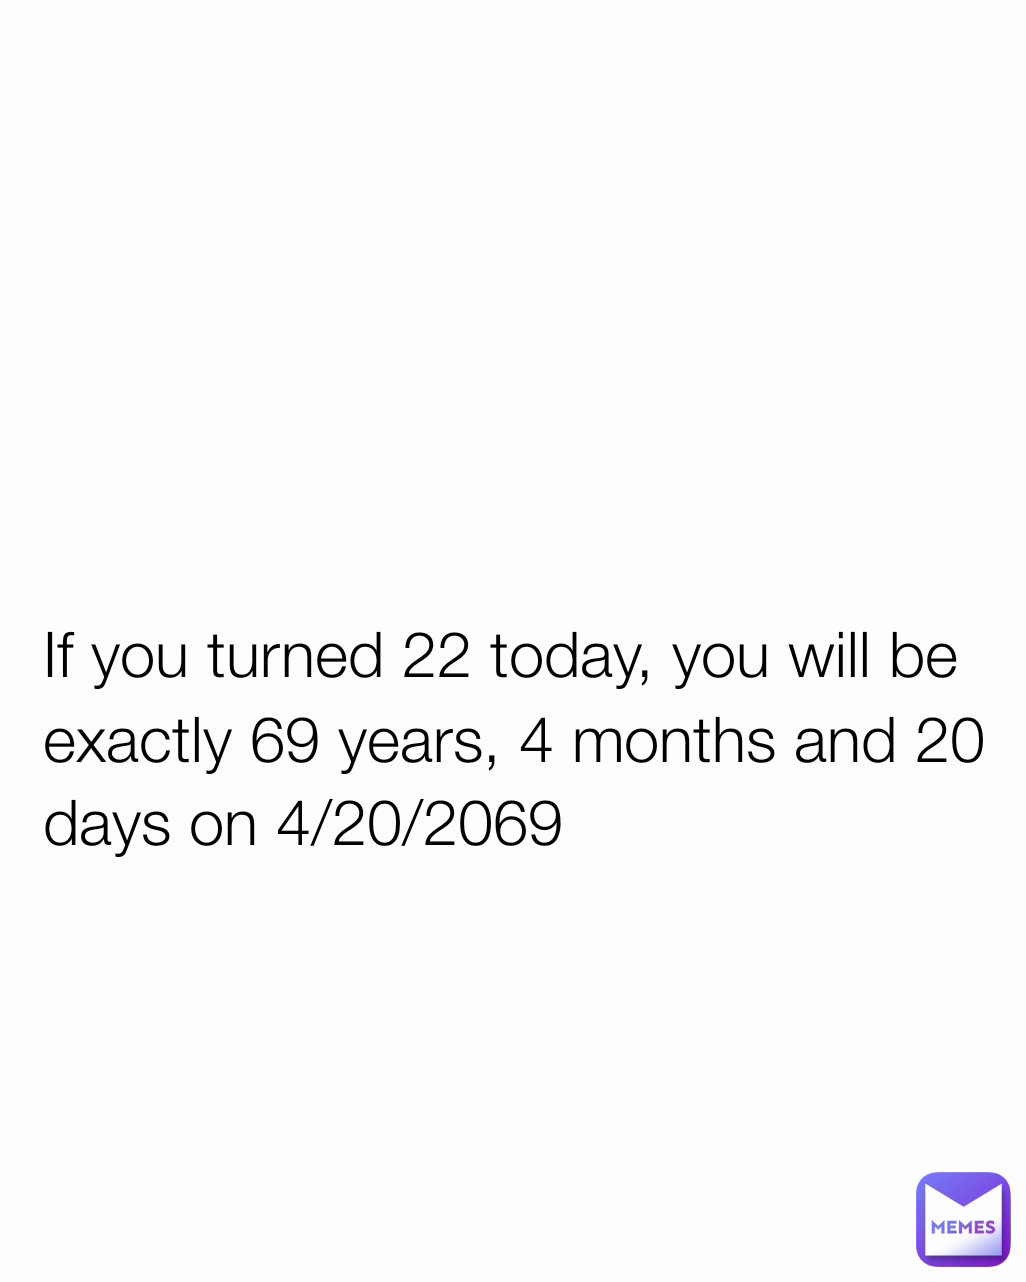 If you turned 22 today, you will be exactly 69 years, 4 months and 20 days on 4/20/2069